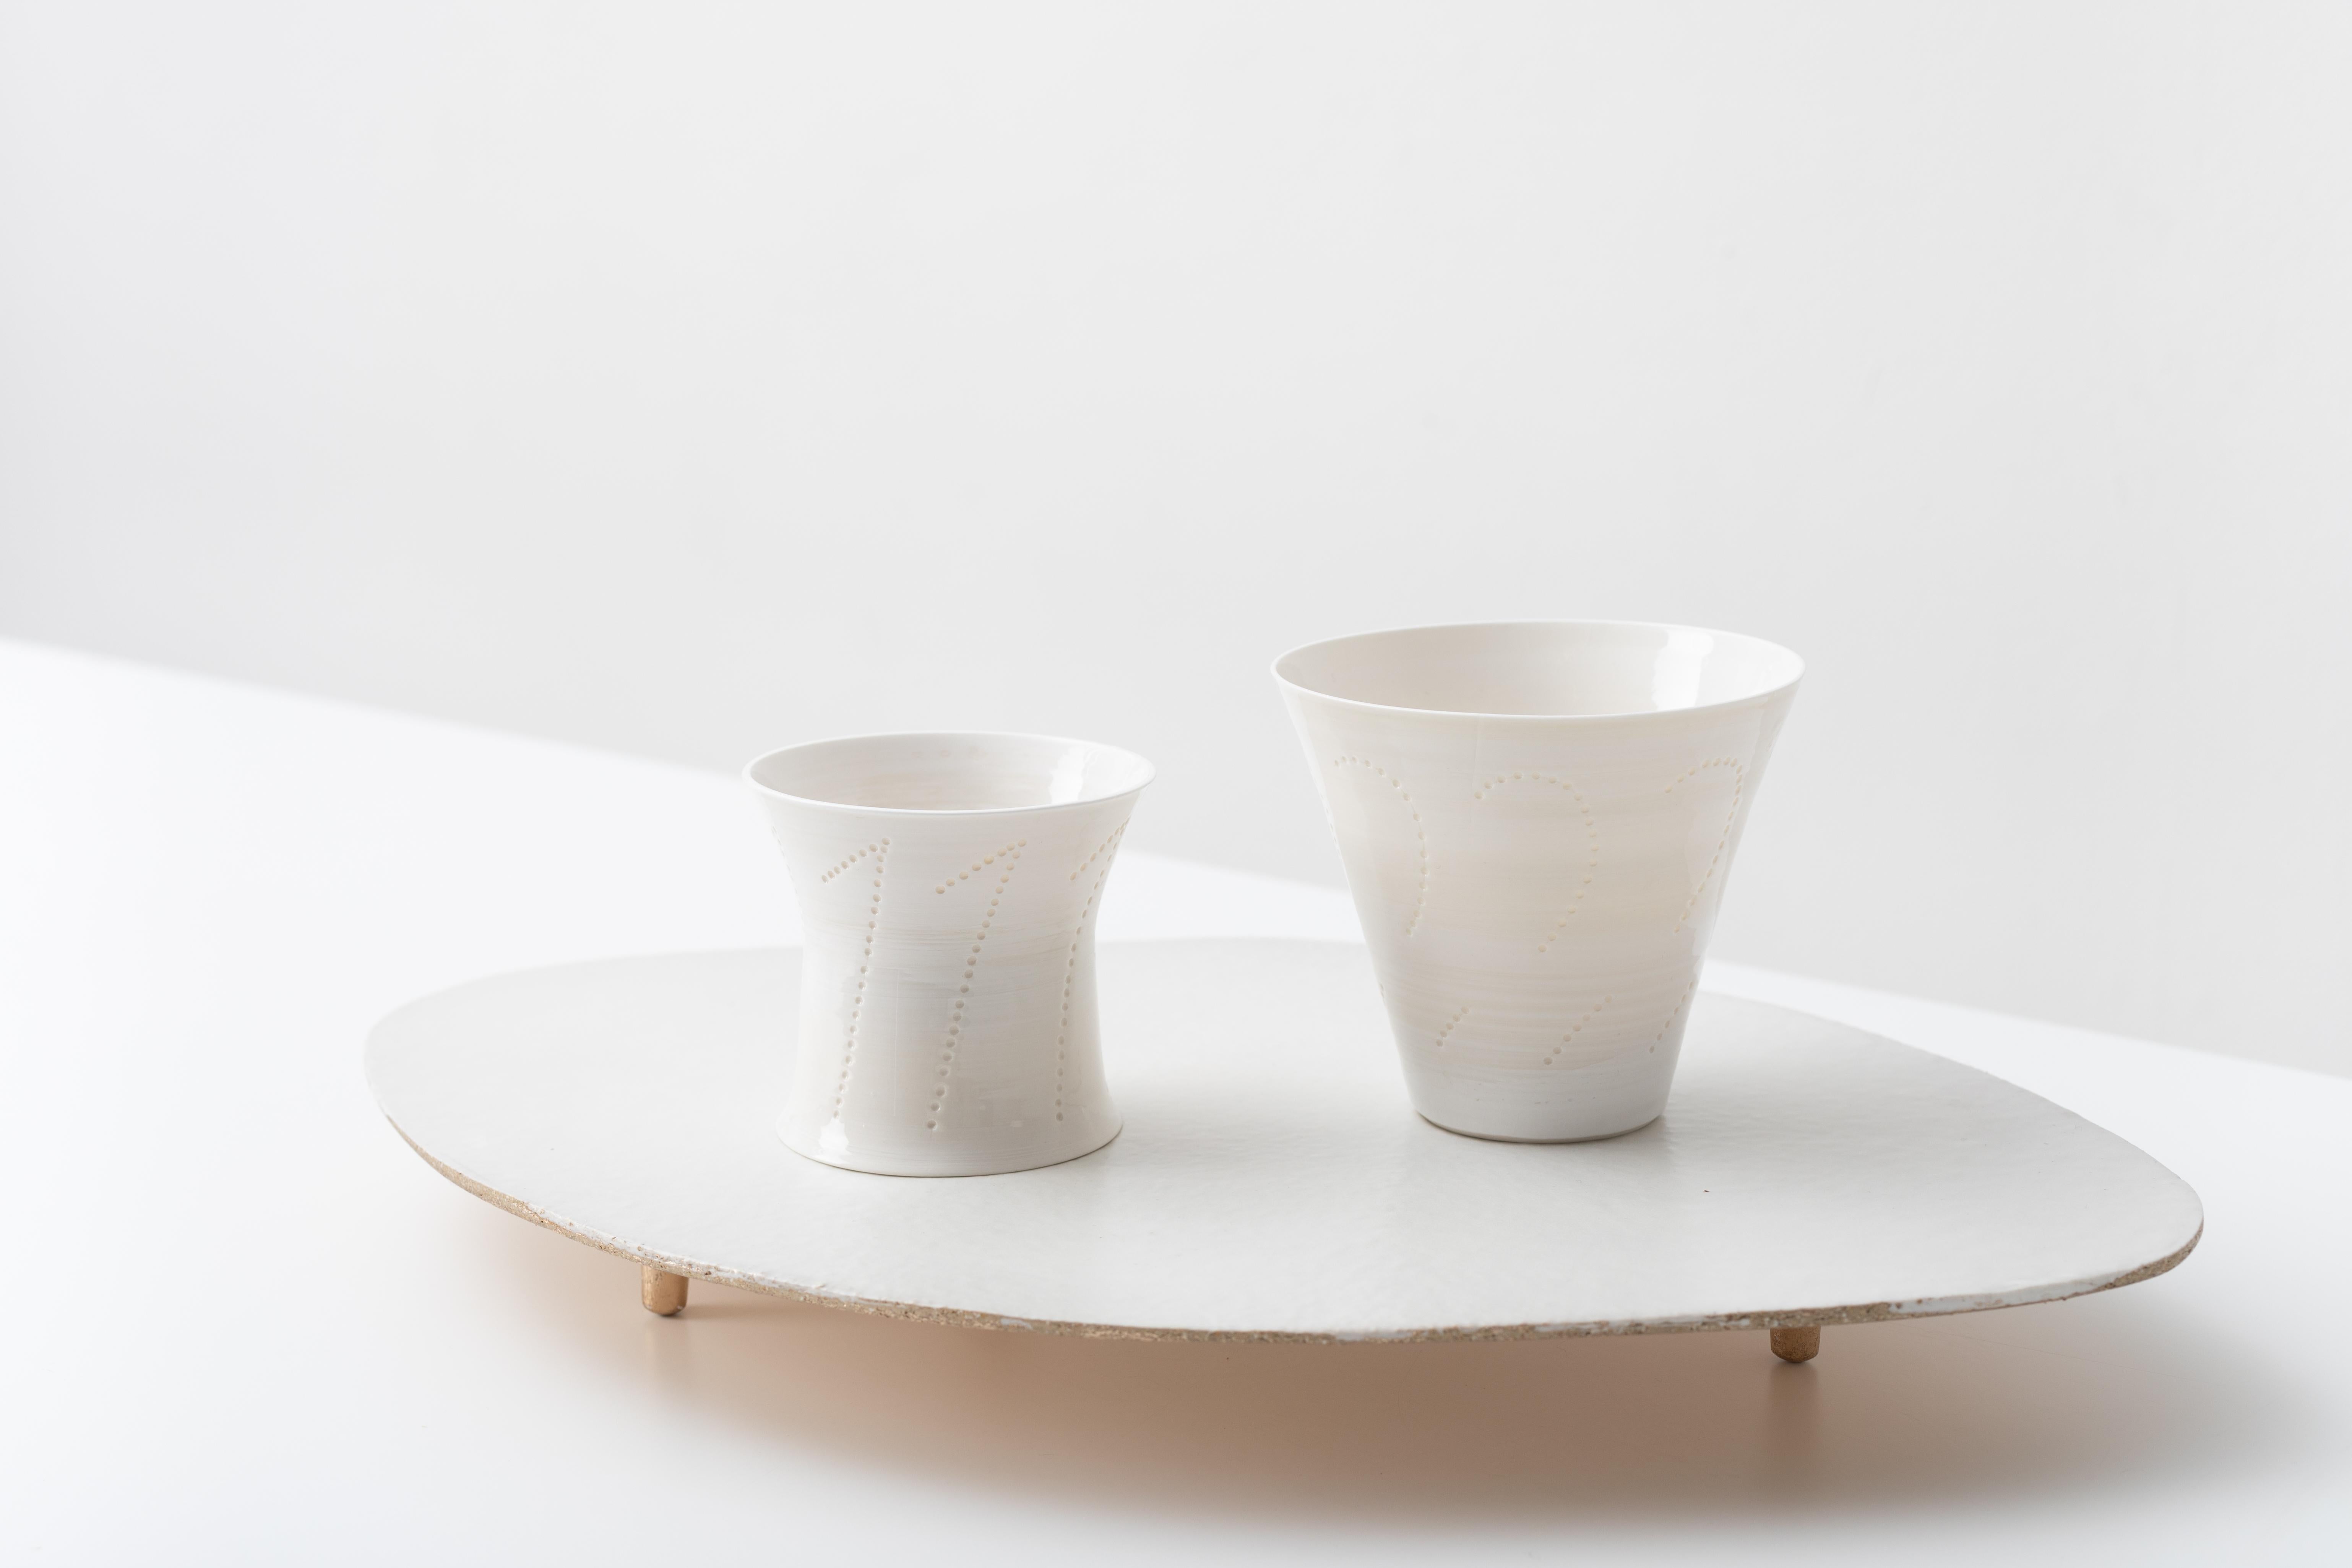 two thrown porcelain vessels on a glazed and gilded ceramic plinth by artist Christopher Riggio